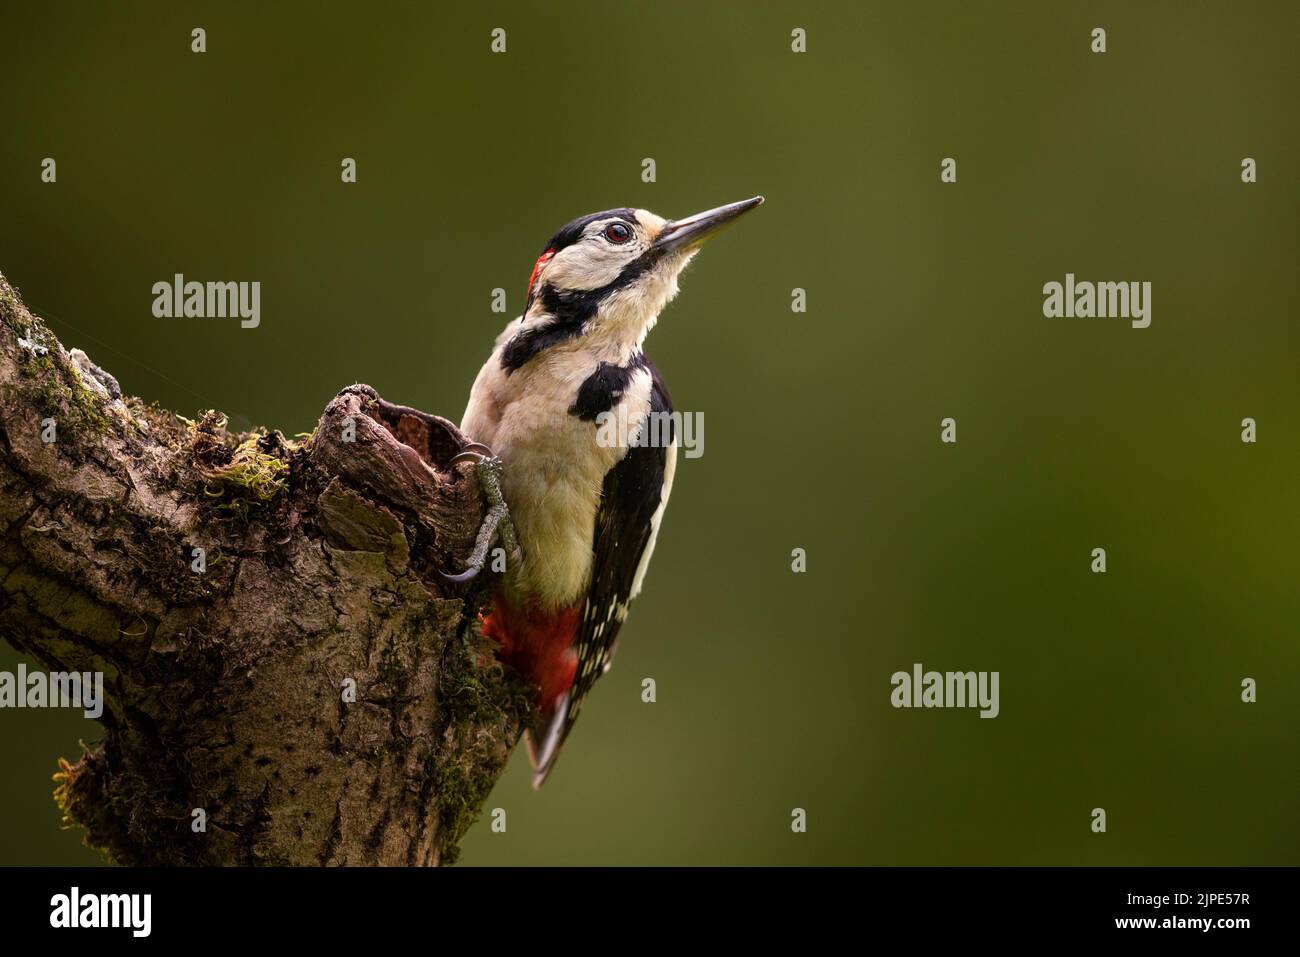 Great Spotted Woodpecker seaching for bugs on a branch. Stock Photo